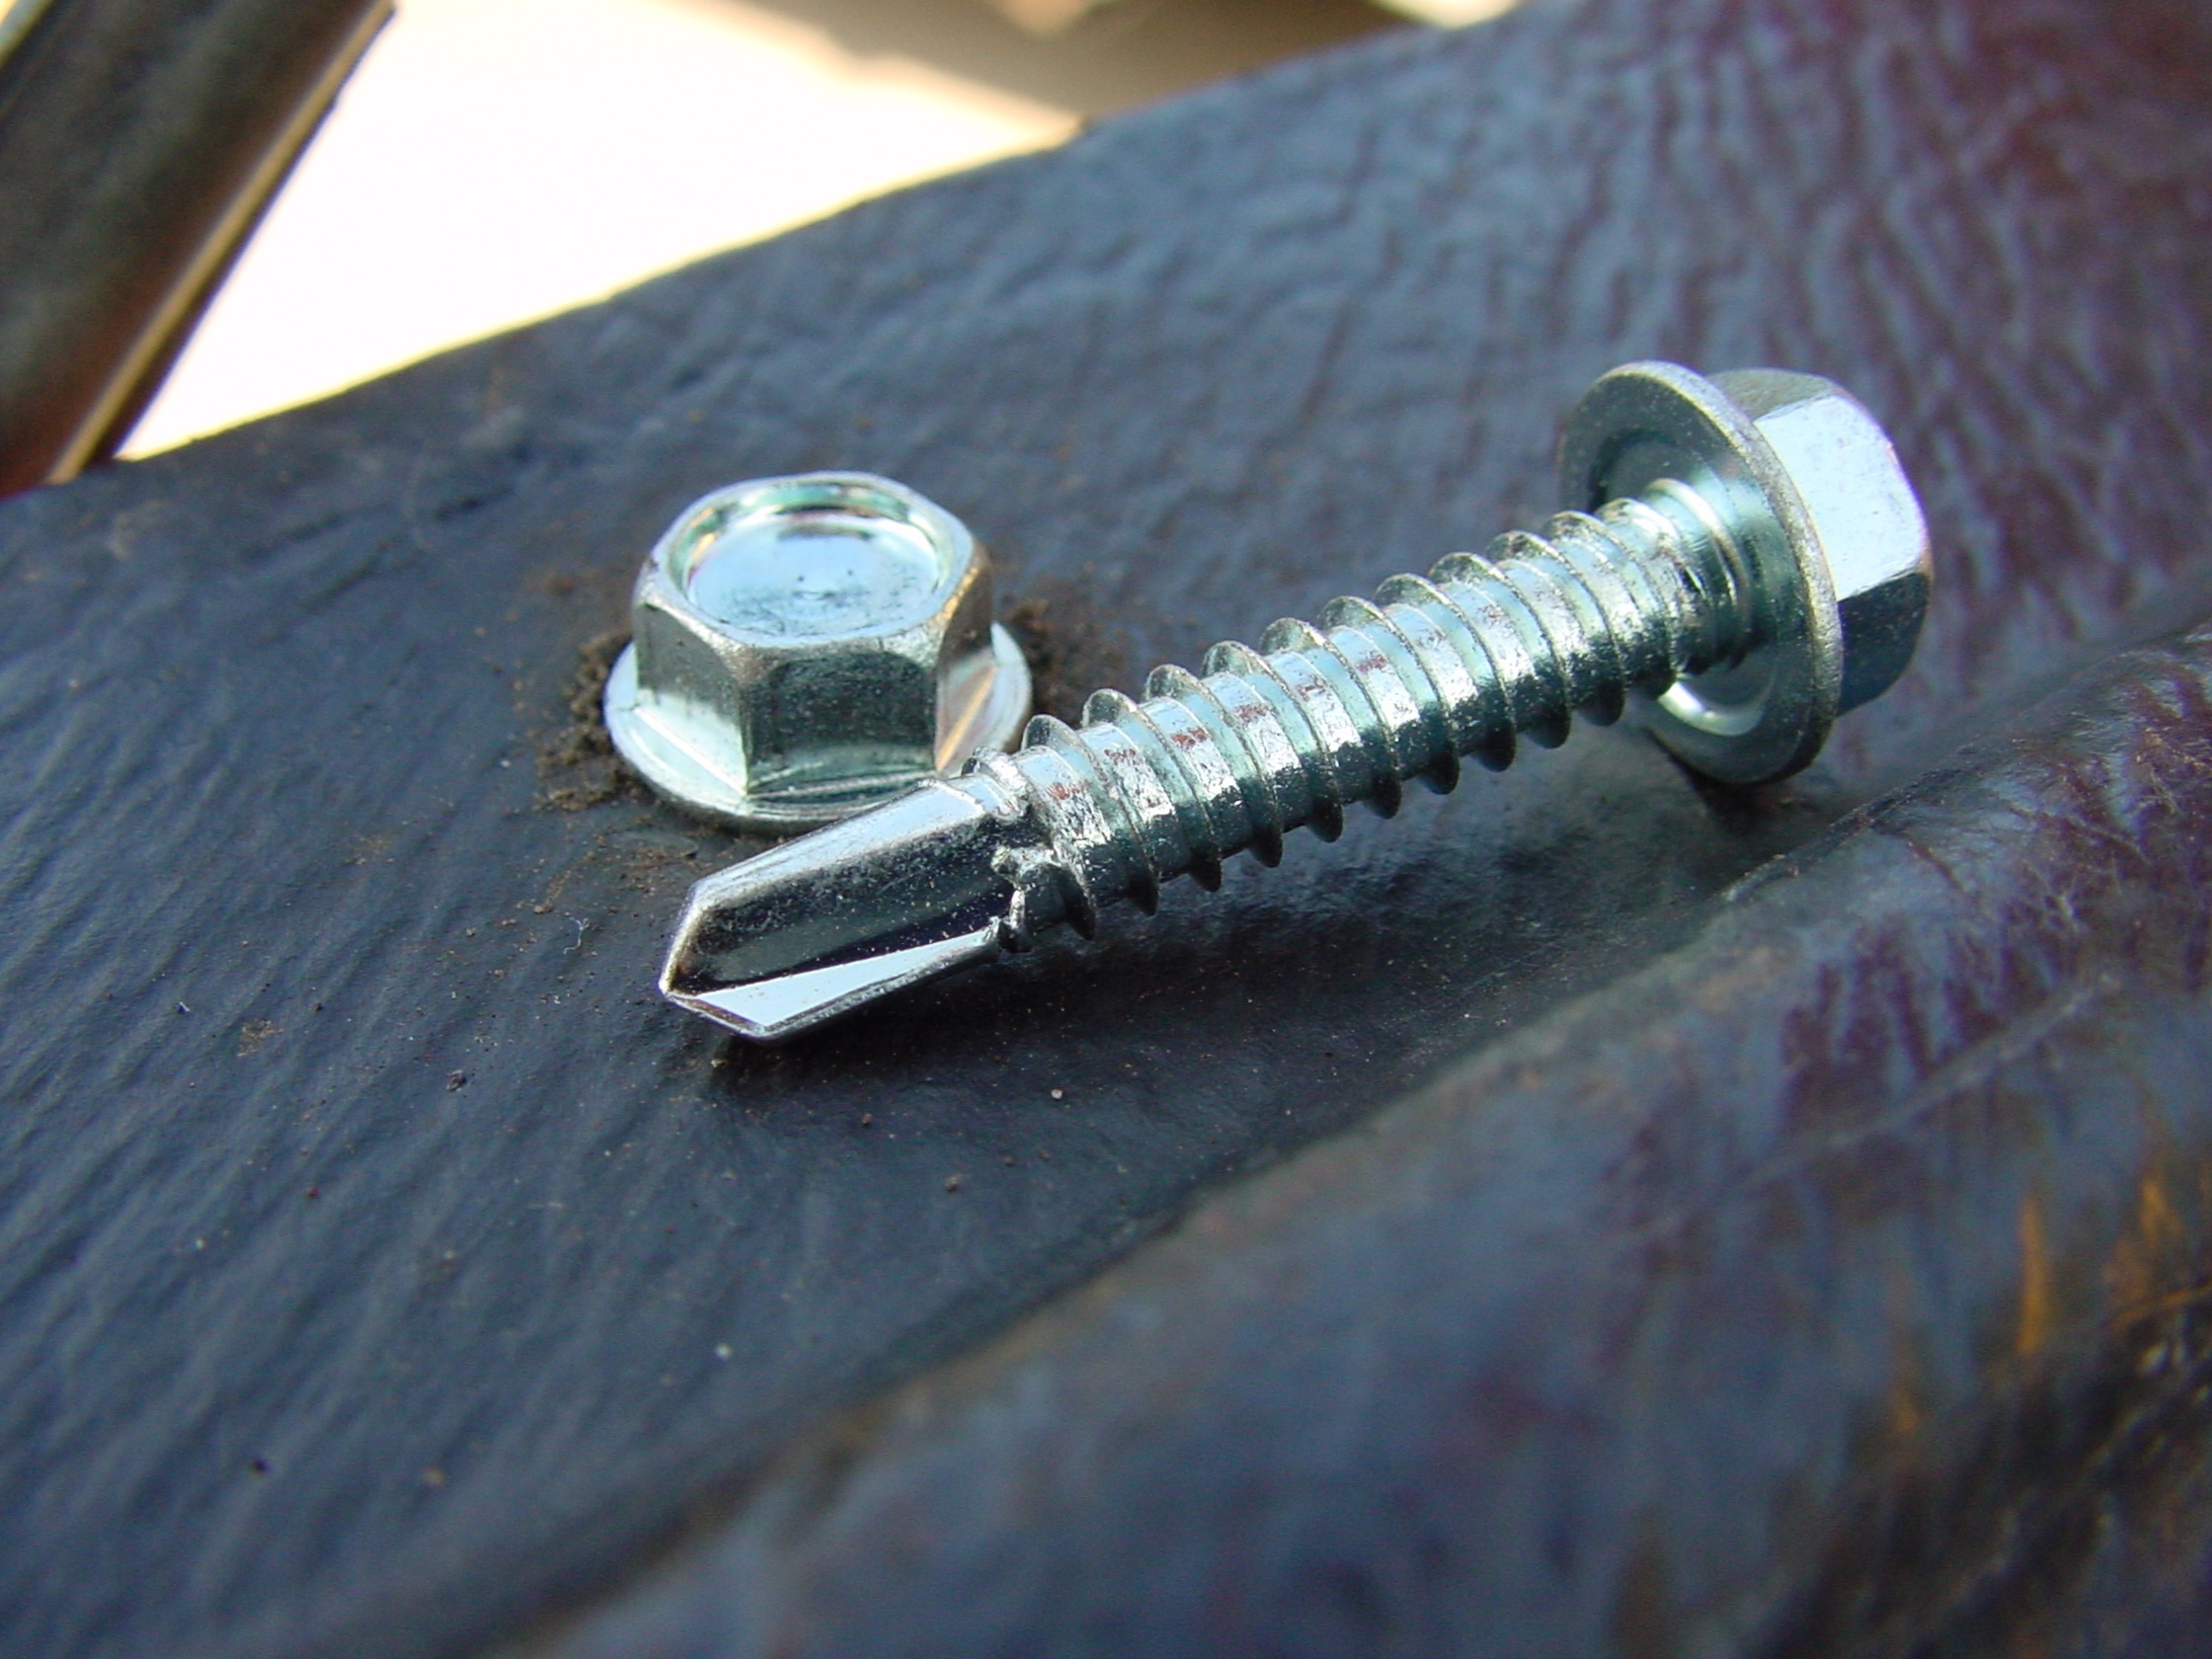 These Are the Screws You Should Be Using